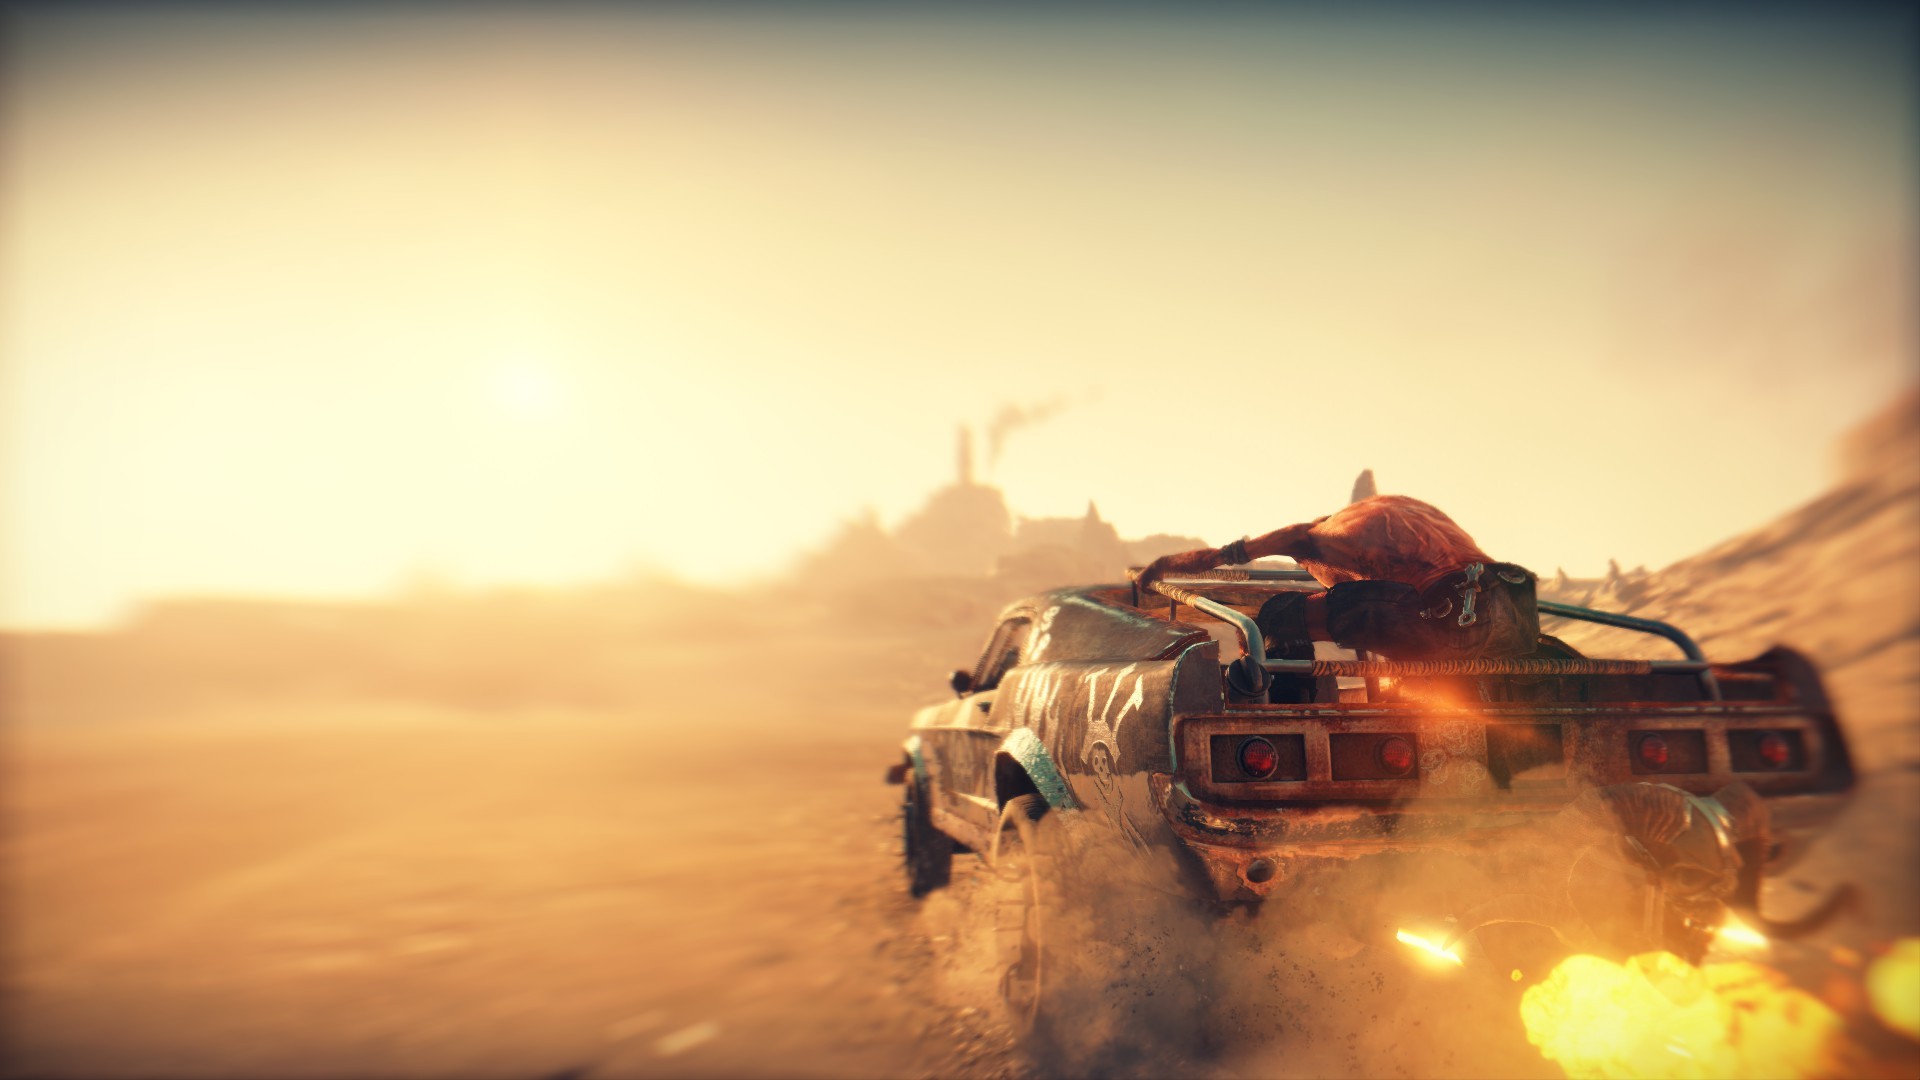 General 1920x1080 Mad Max (game) video games car vehicle apocalyptic desert PC gaming